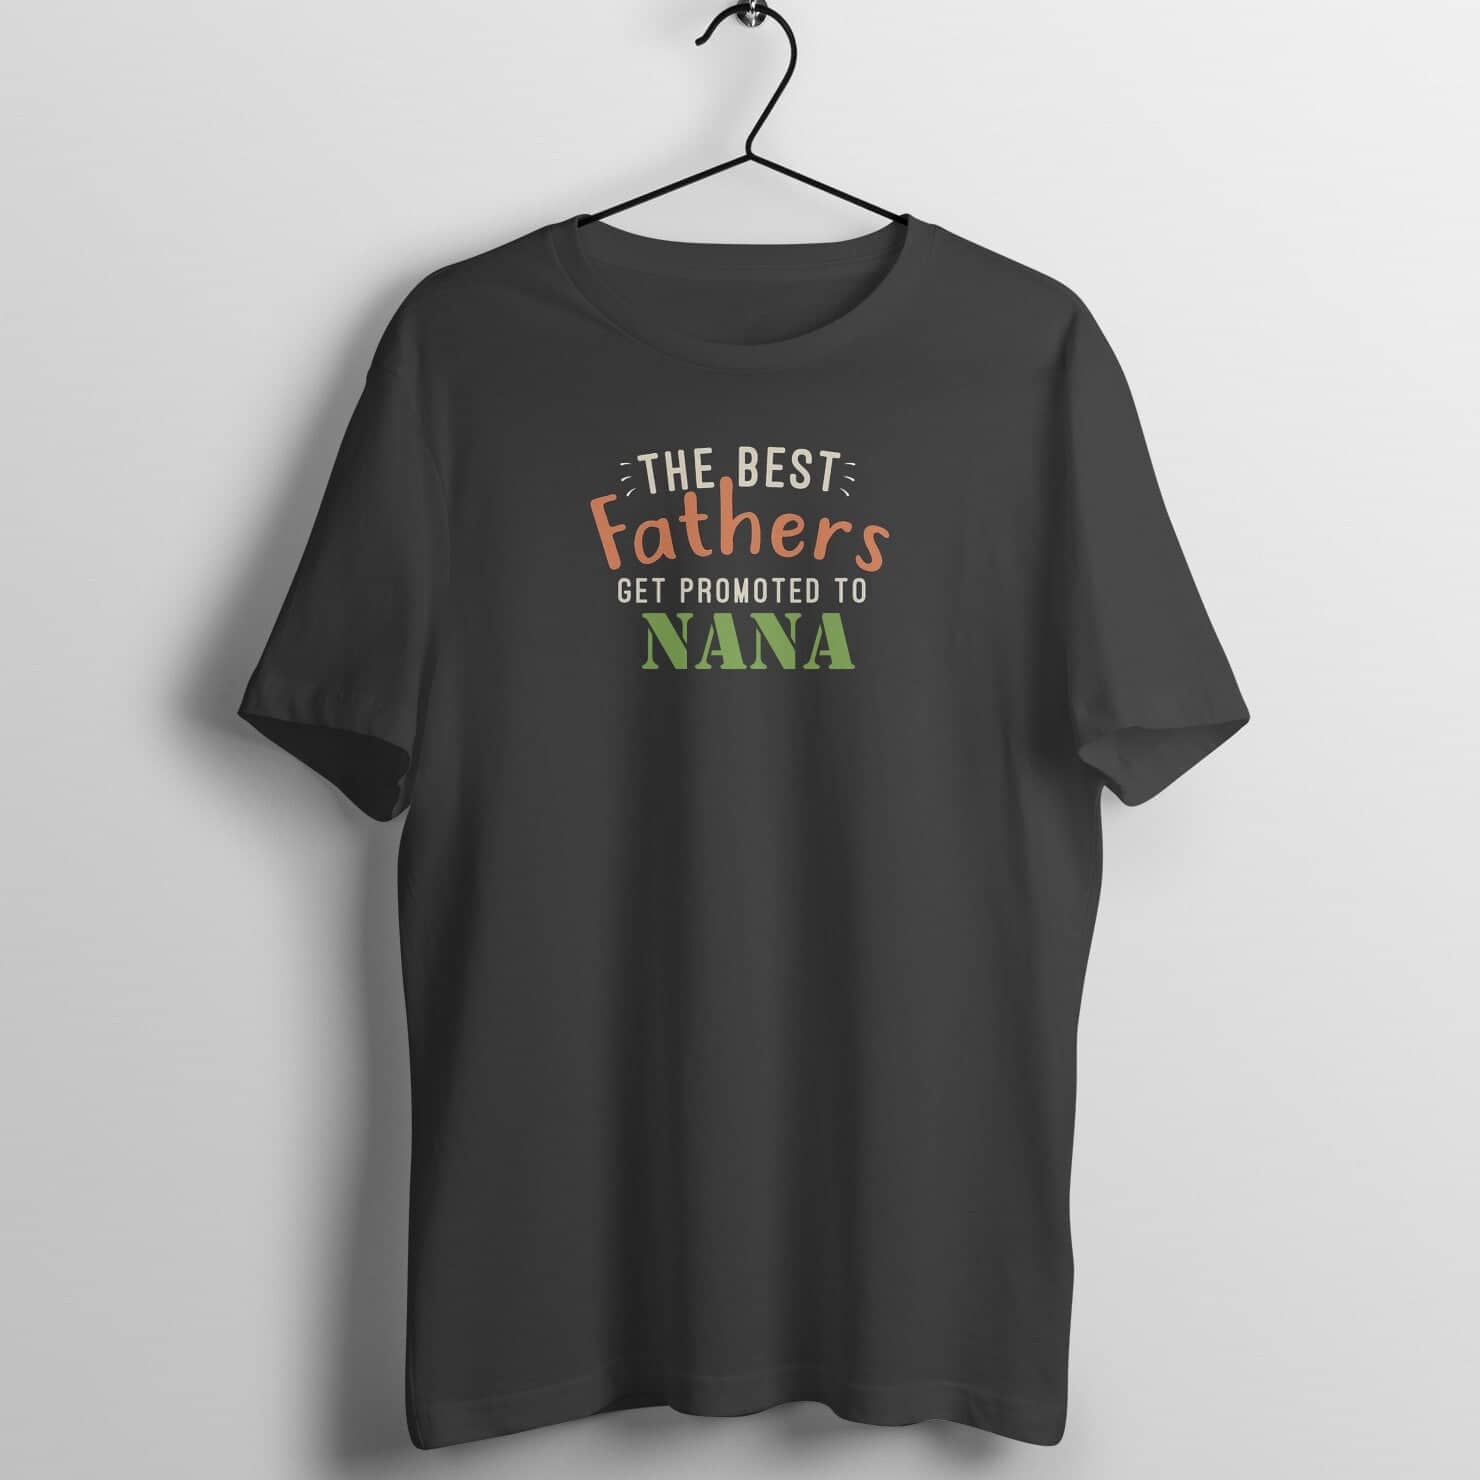 The Best Fathers Gets Promoted to Nana Exclusive Black T Shirt for Men freeshipping - Catch My Drift India